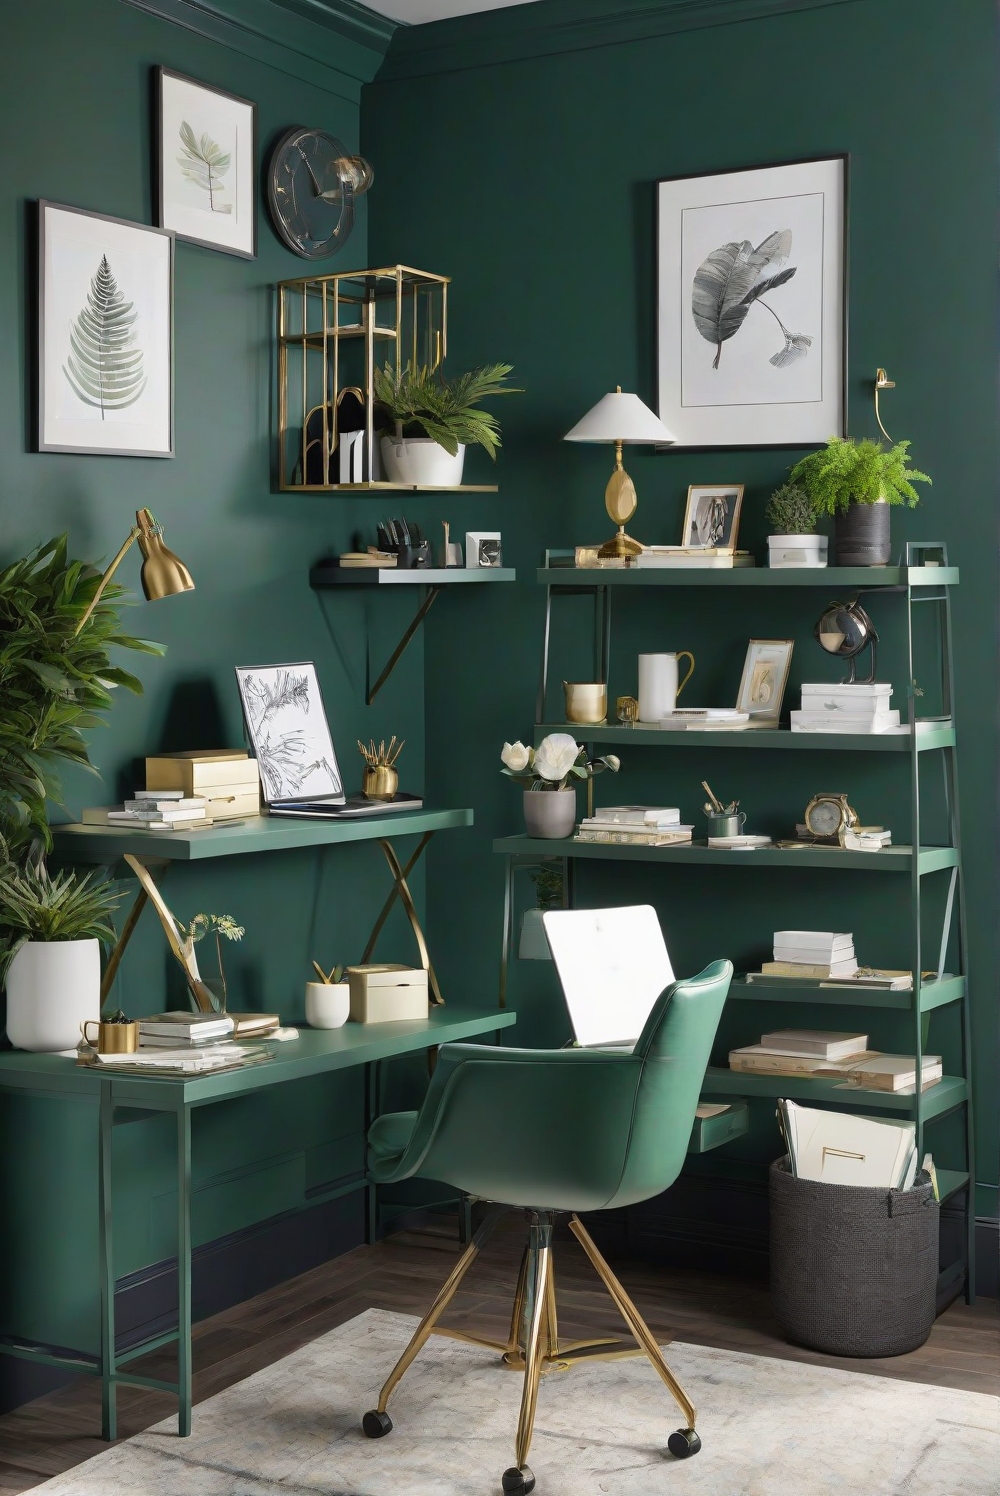 Newburg Green, Enchanted Forest, Wall Paint Color, Nature-inspired, Tranquility, Interior Design, Kitchen Designs, Living Room Interior, Home Paint Colors